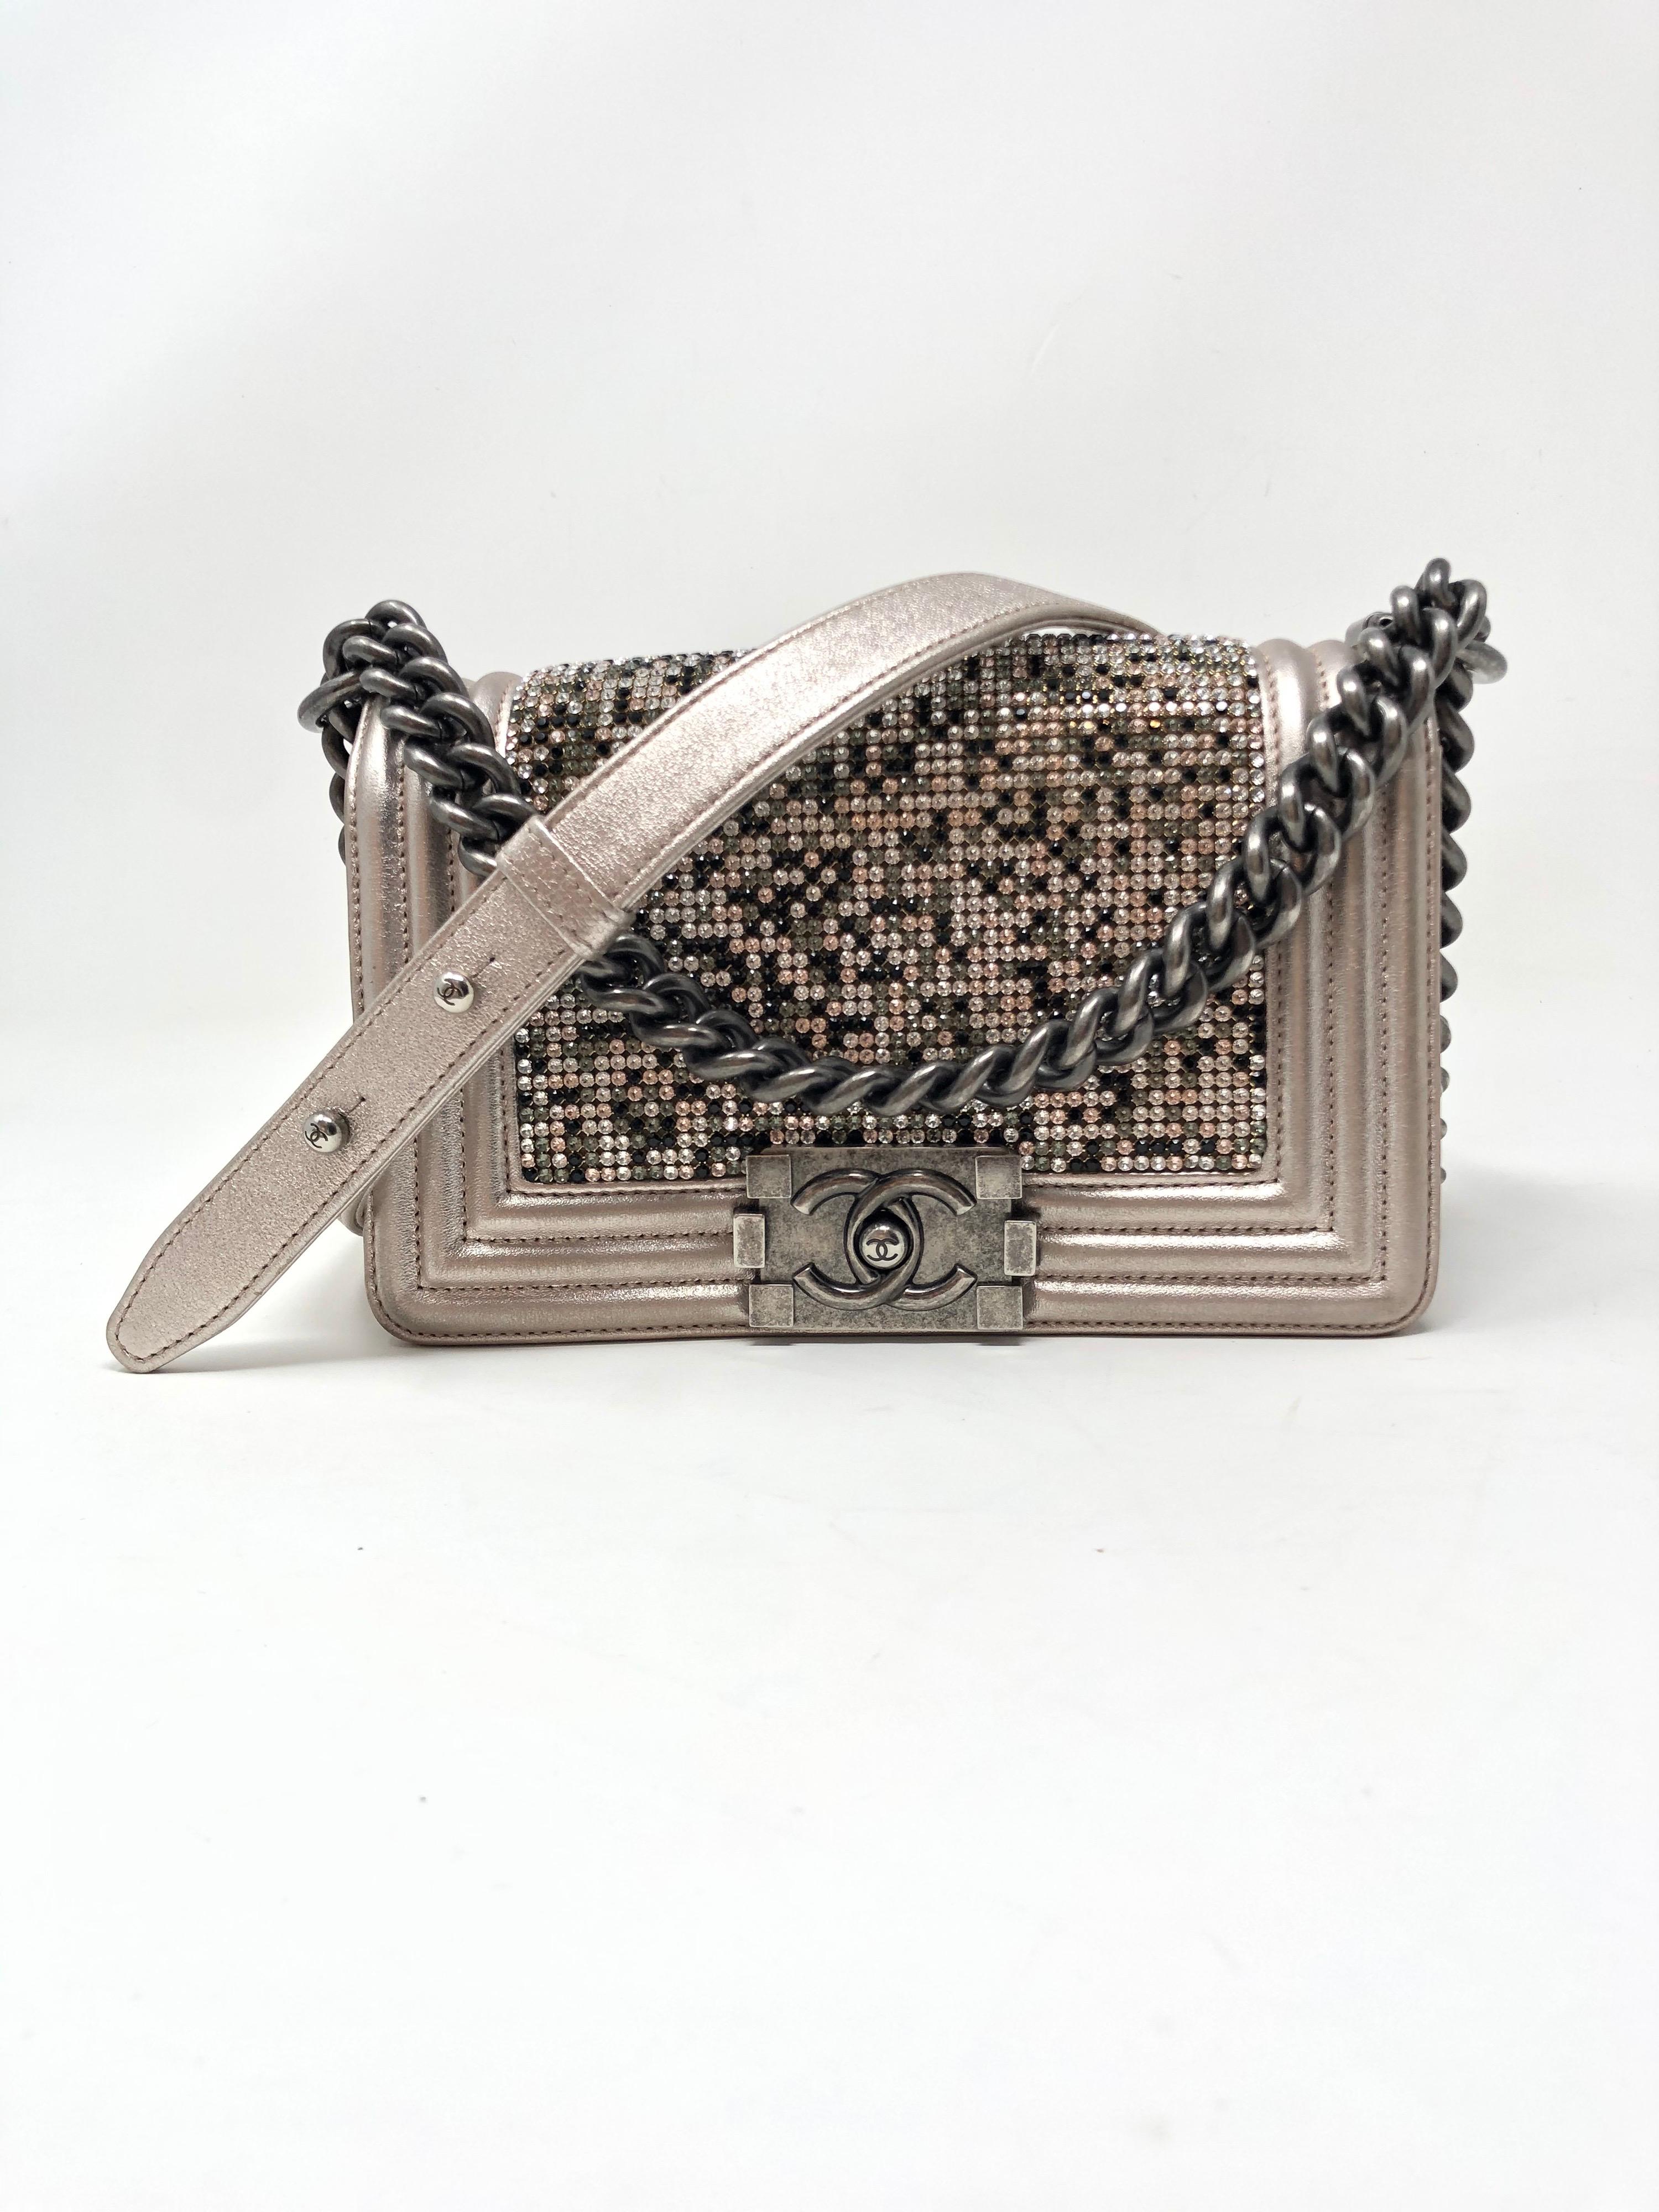 Chanel Swarovsky Crystal Boy Bag. Champagne metallic color leather Boy bag with multi color crystals. Mint condition. Beautiful and unique bag. Small size Boy with antique silver hardware. Guaranteed authentic. 